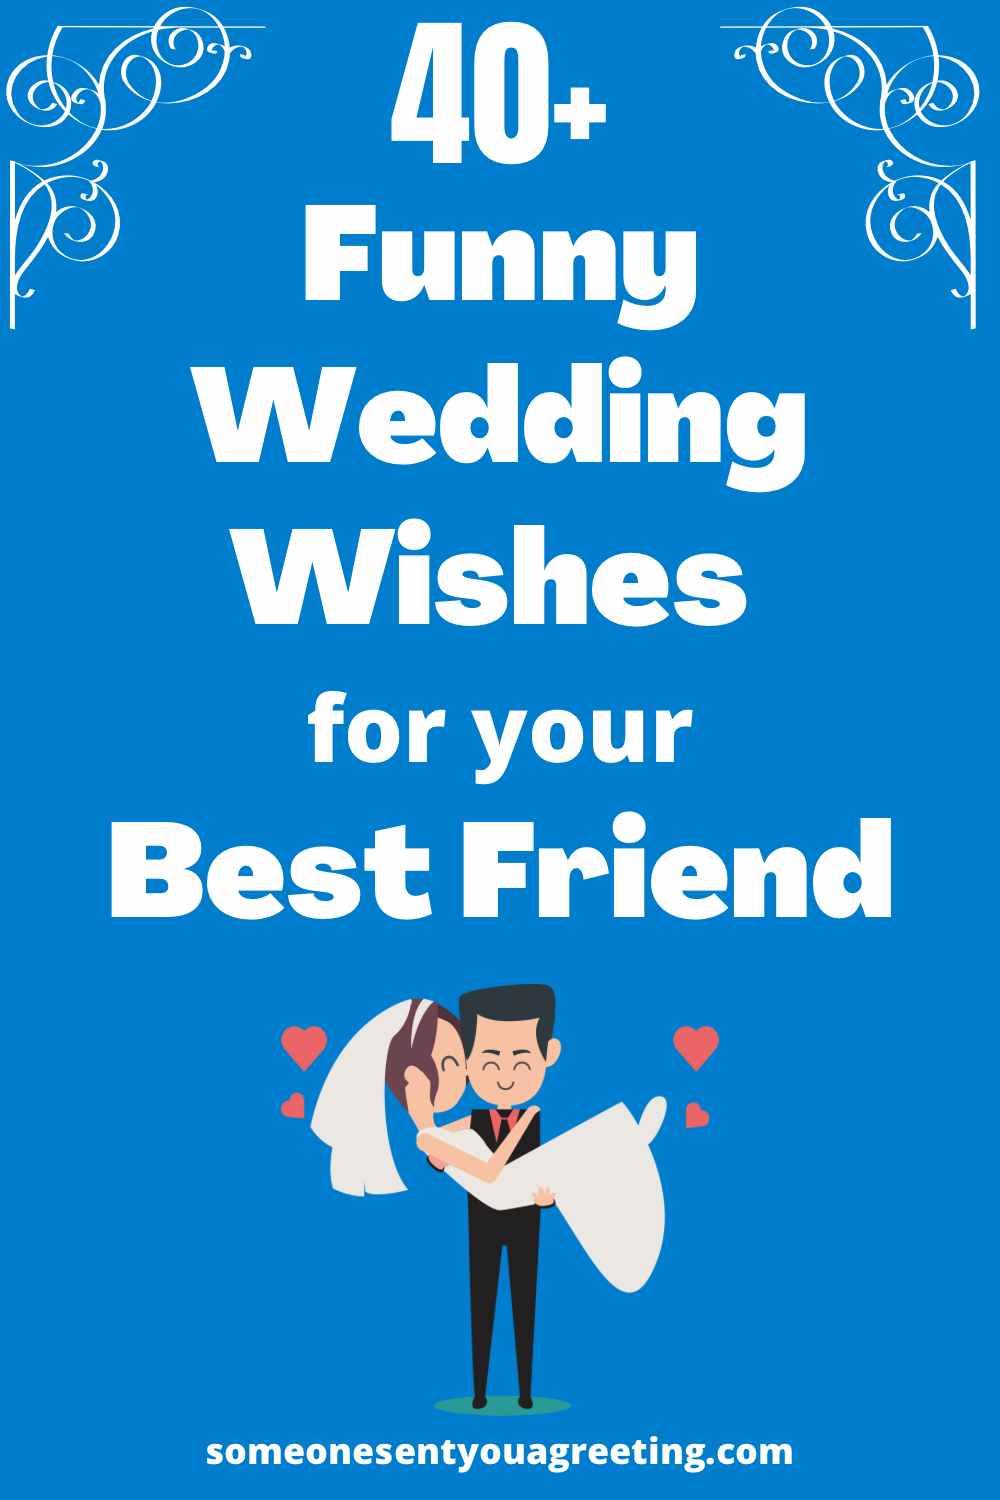 41+ Funny Wedding Wishes for your Best Friend - Someone Sent You A Greeting